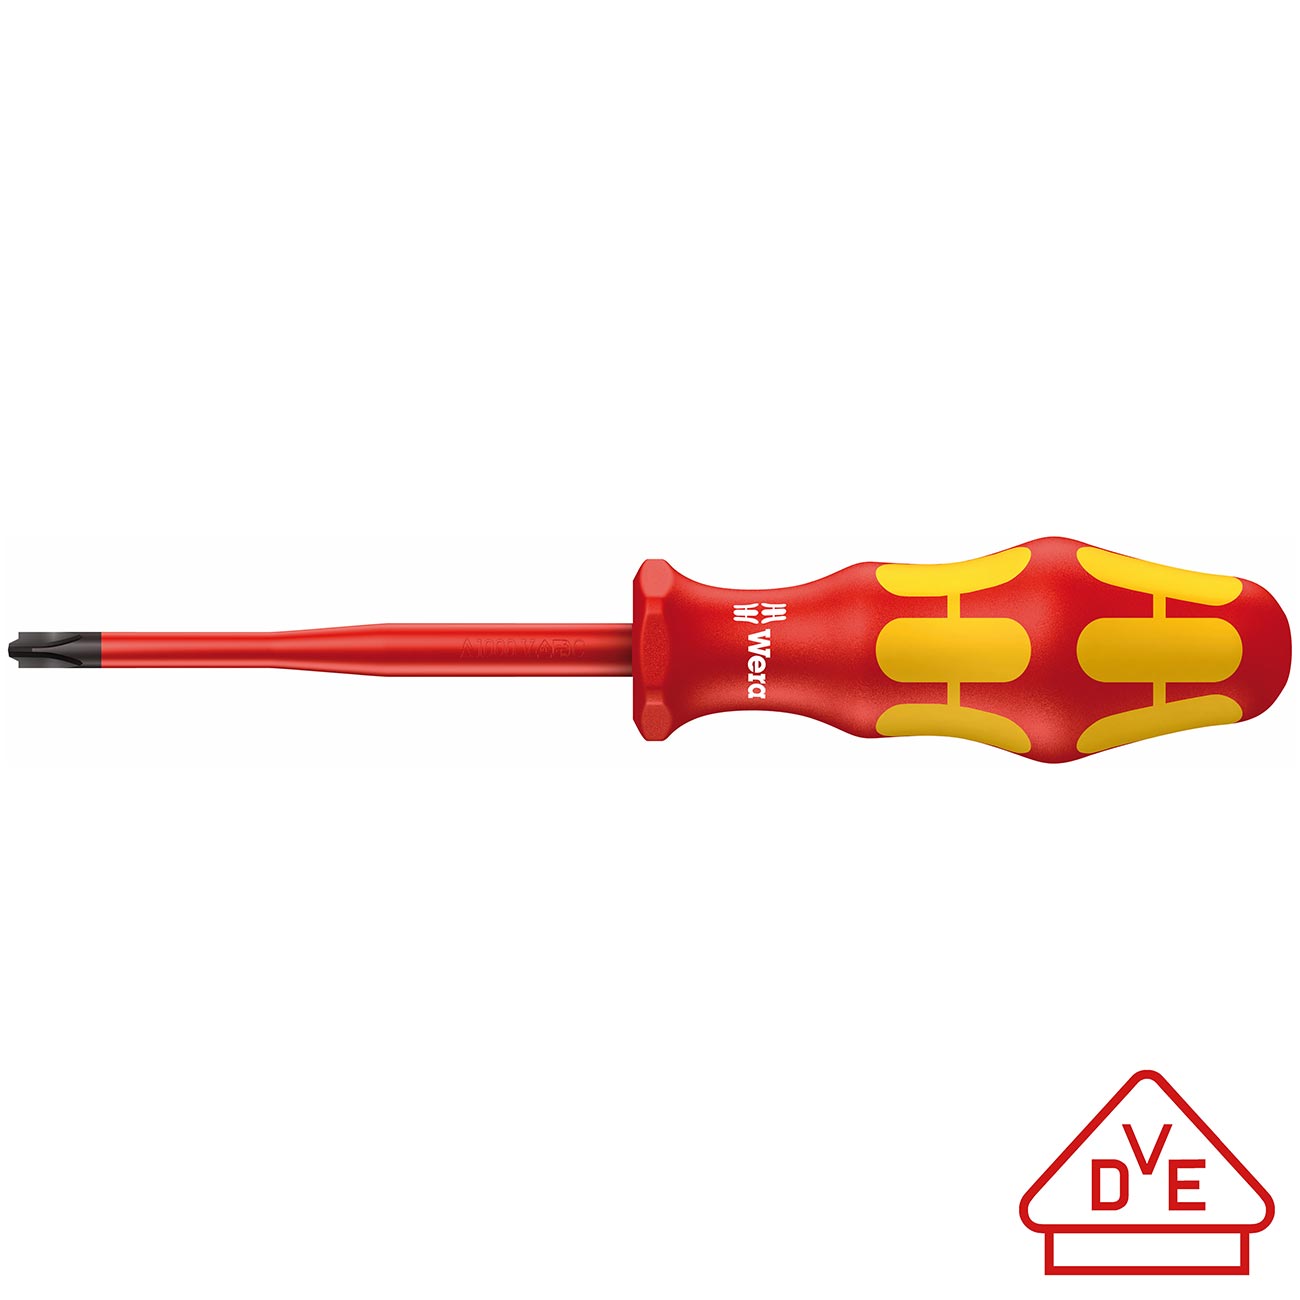 Wera Screwdriver: VDE Insulated Phillips/Slotted PH/S #1 x 80mm (+/-)